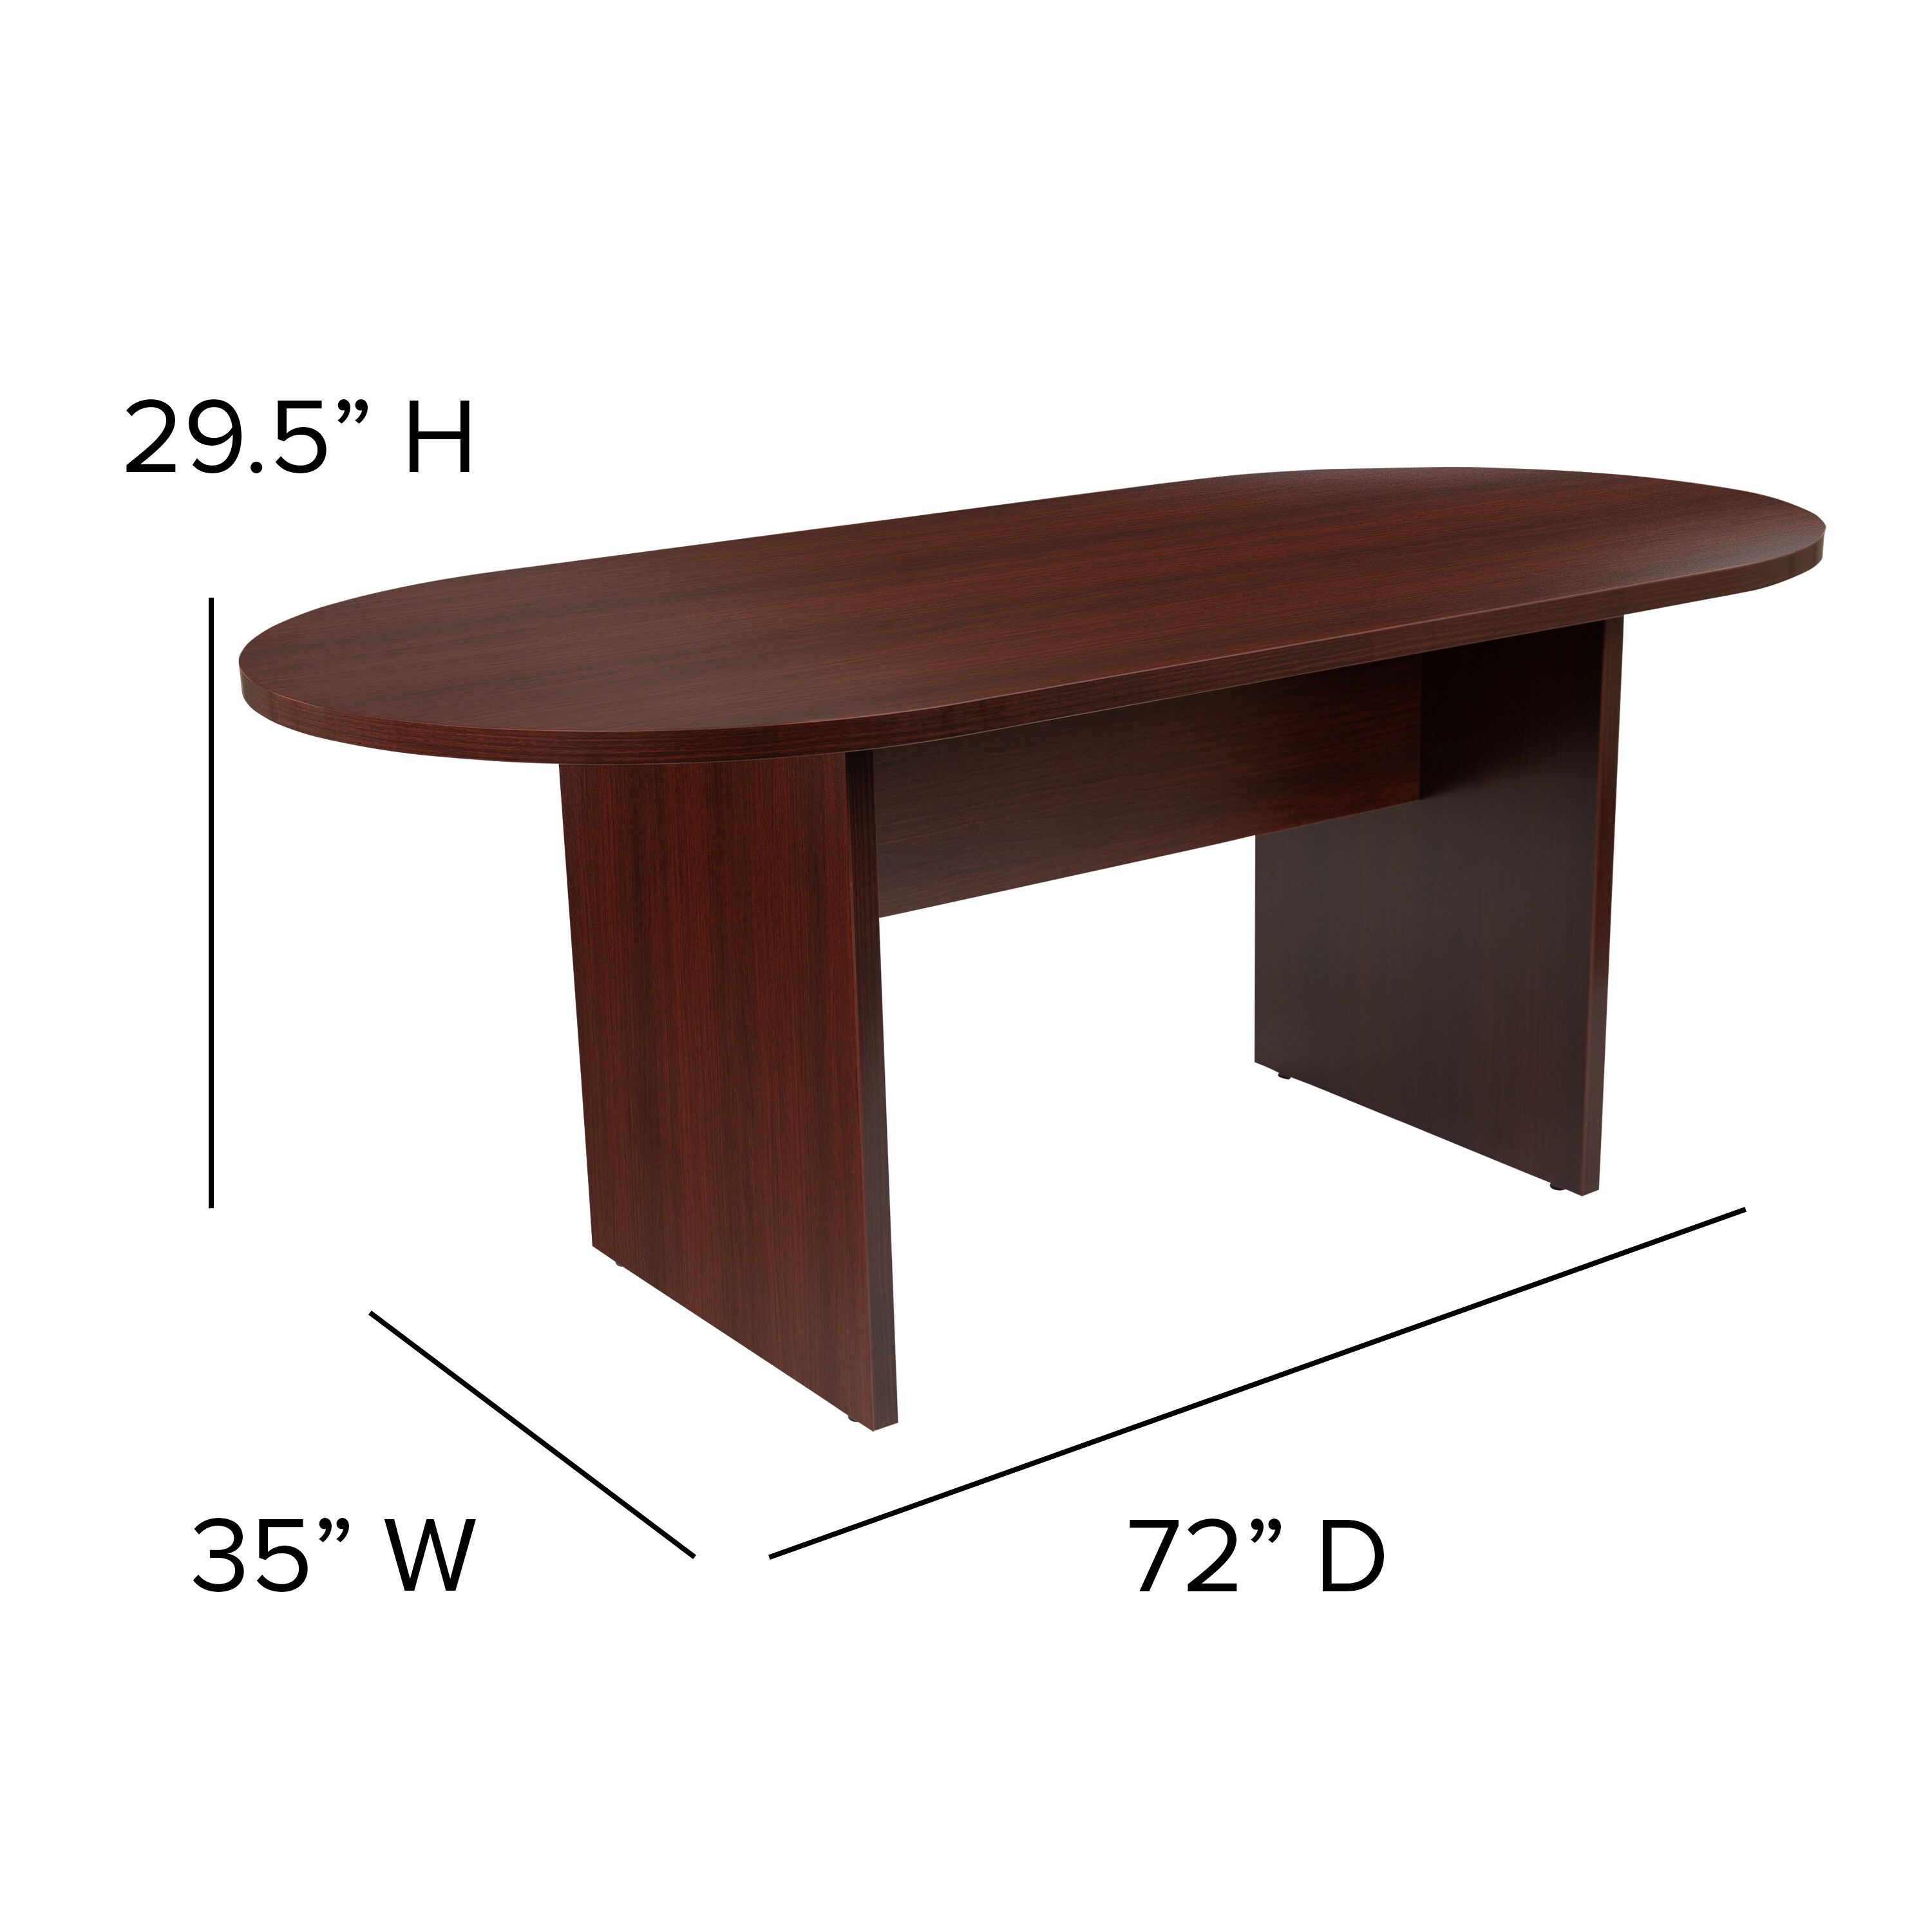 Cherry Wood Red 1 Thick Table Top 59 x 29.5 Large Surface Area 